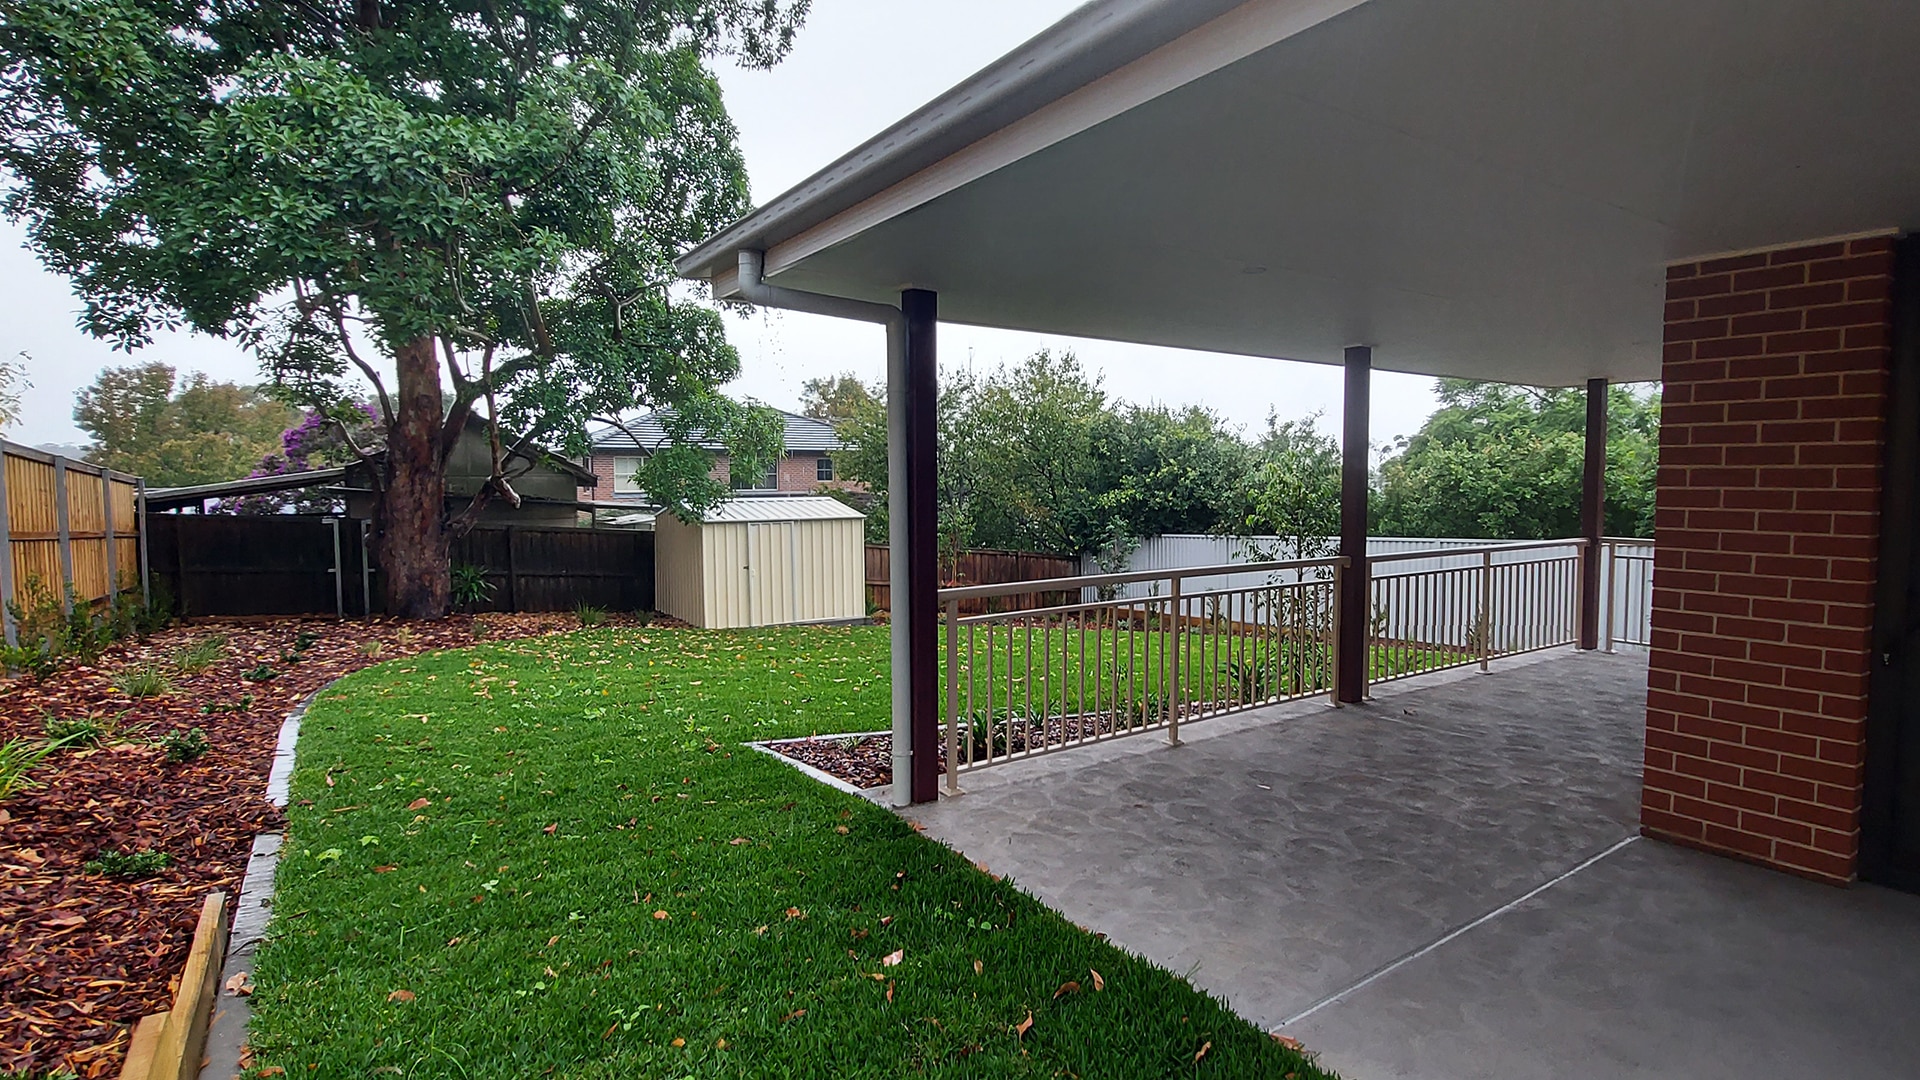 Backyard at the Normanhurst 4 property, featuring an undercover area connected to the house, grassed lawn, white shed and large tree in the corner.